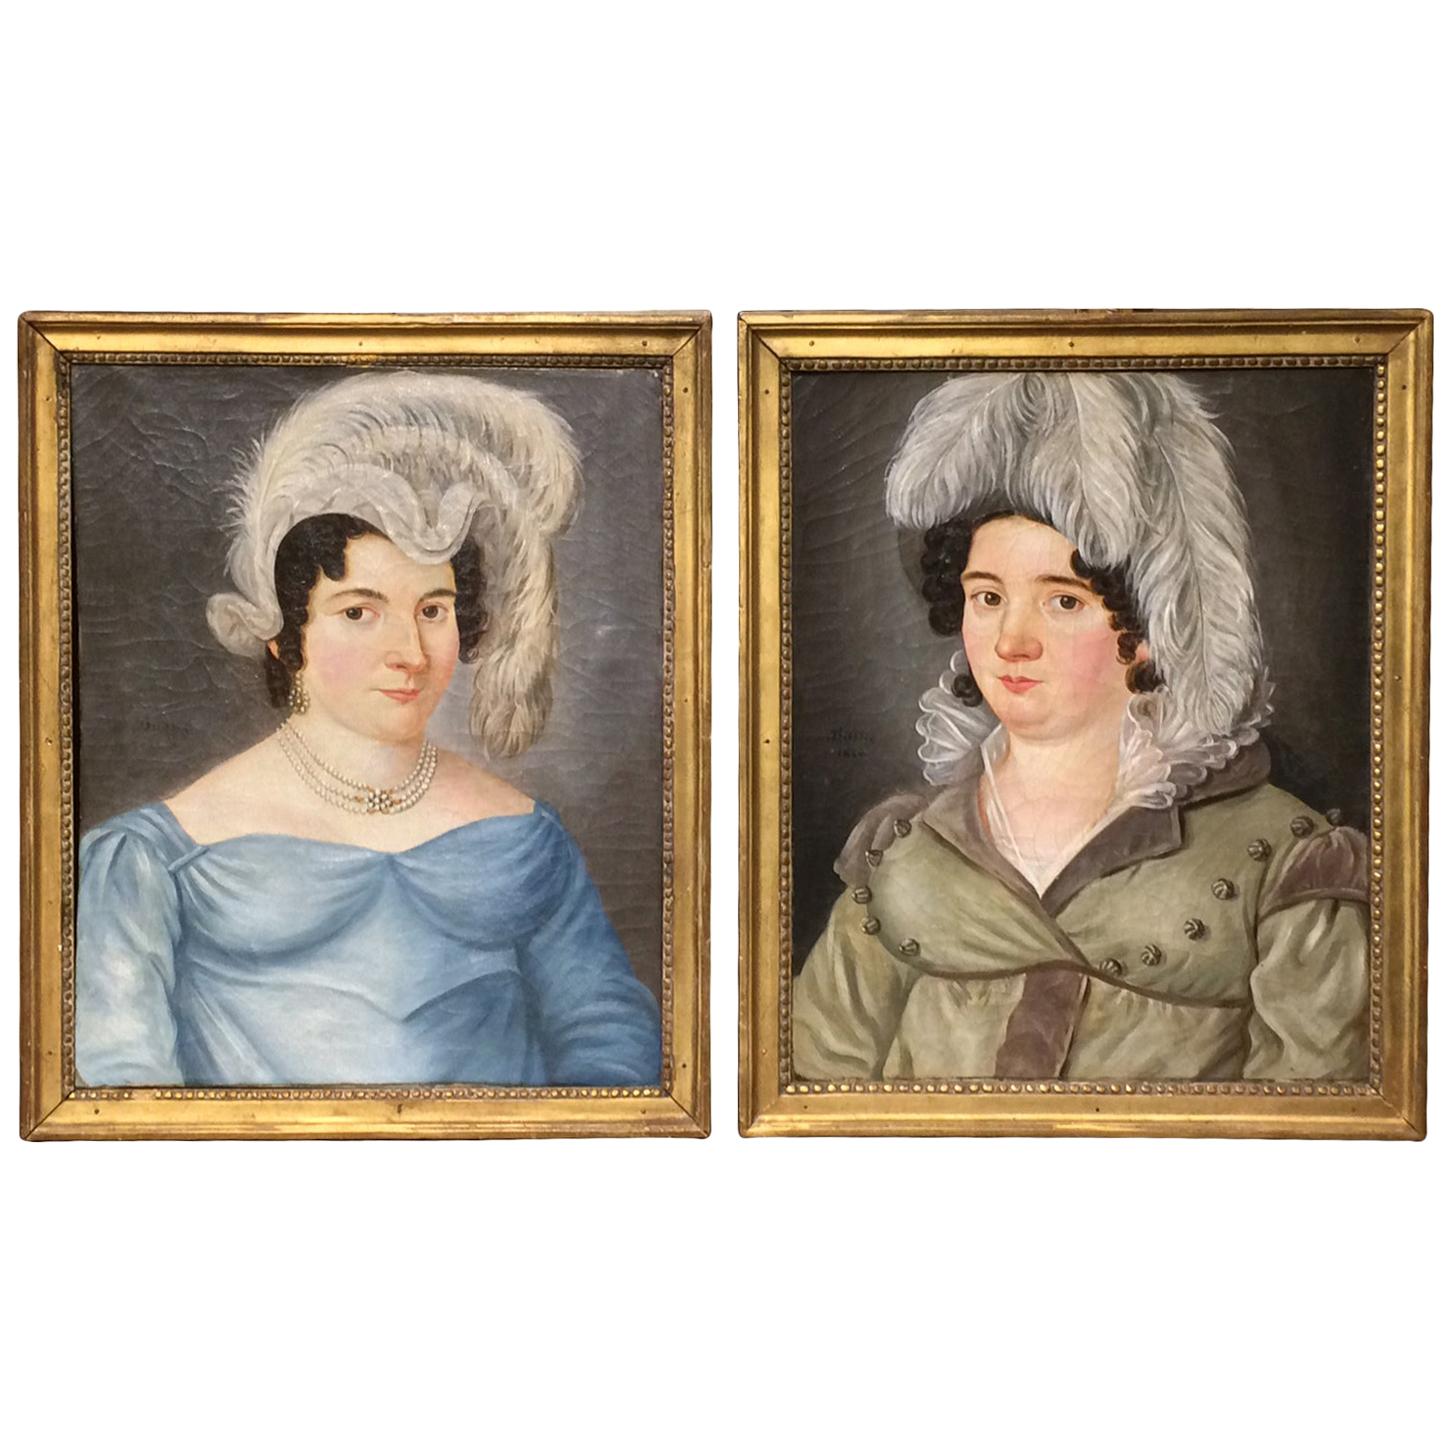 Charming Pair of Early 19th Century Portraits of Two Fashionable Sisters